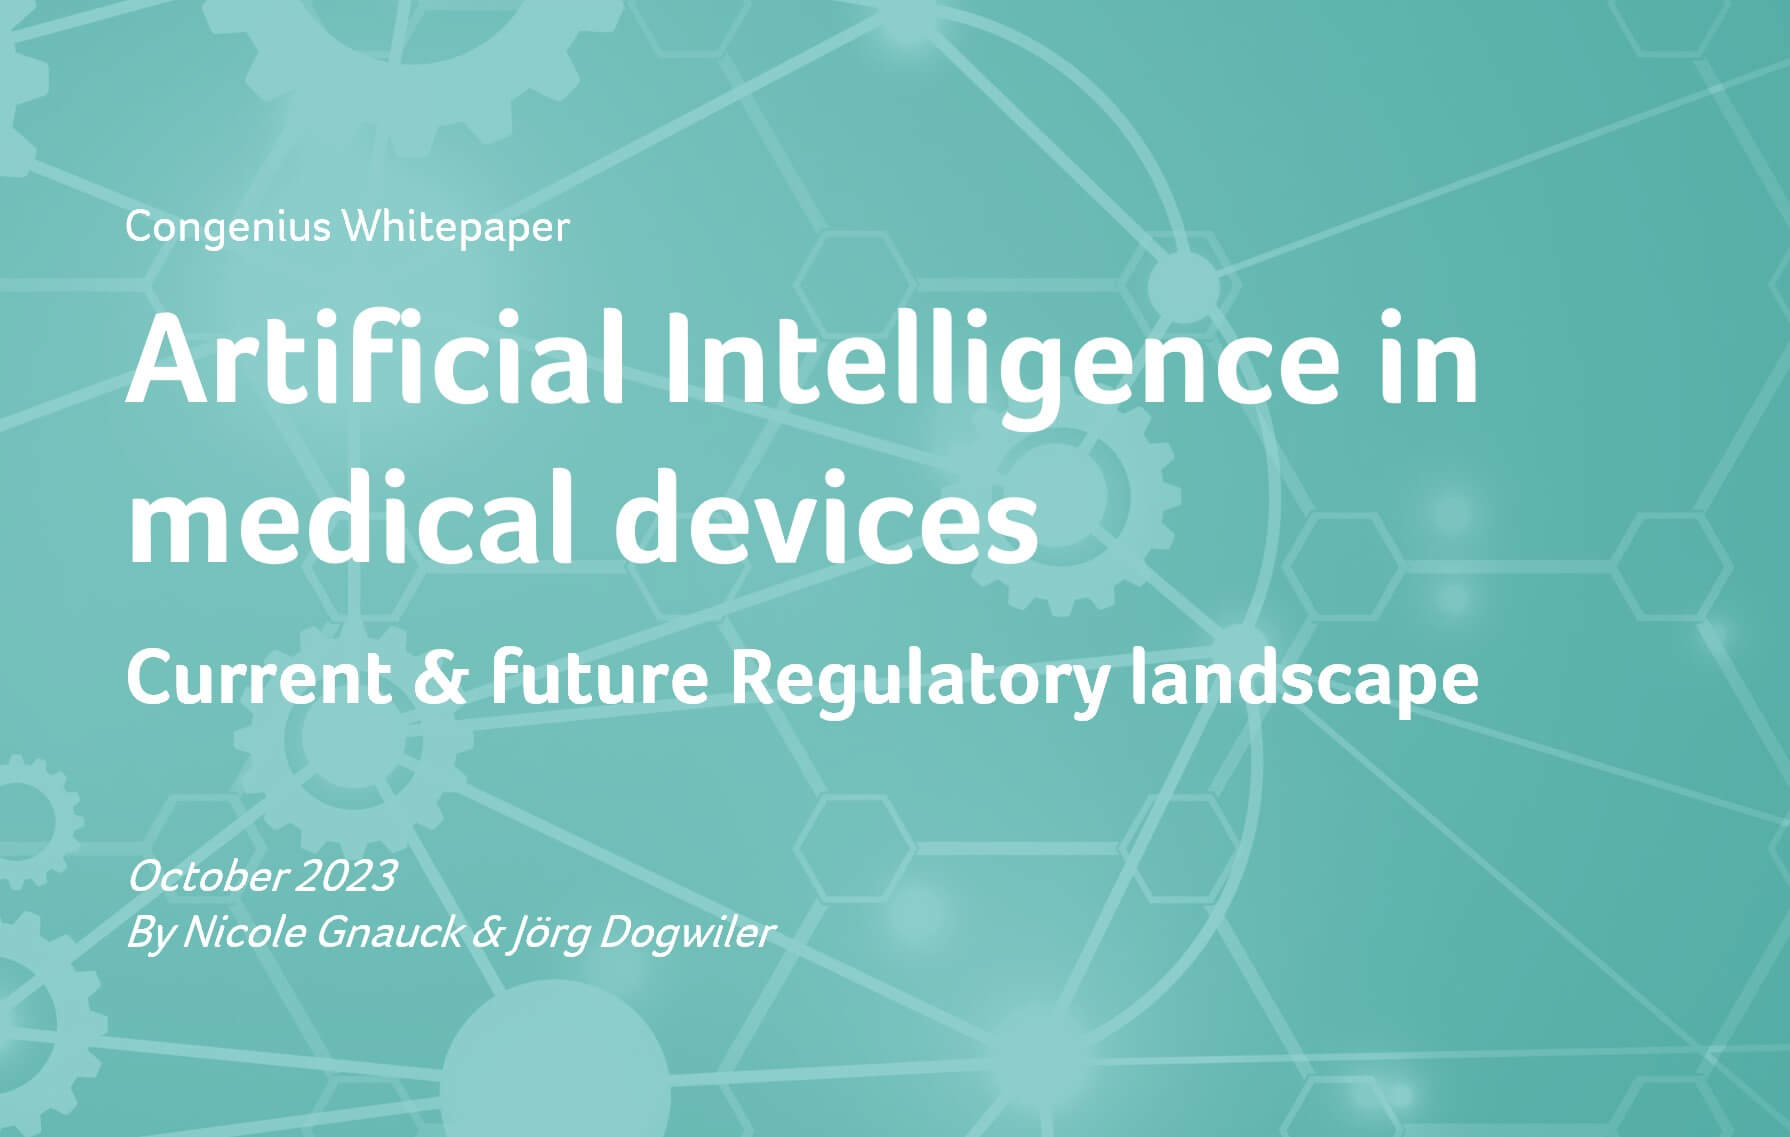 Artificial Intelligence in medical devices